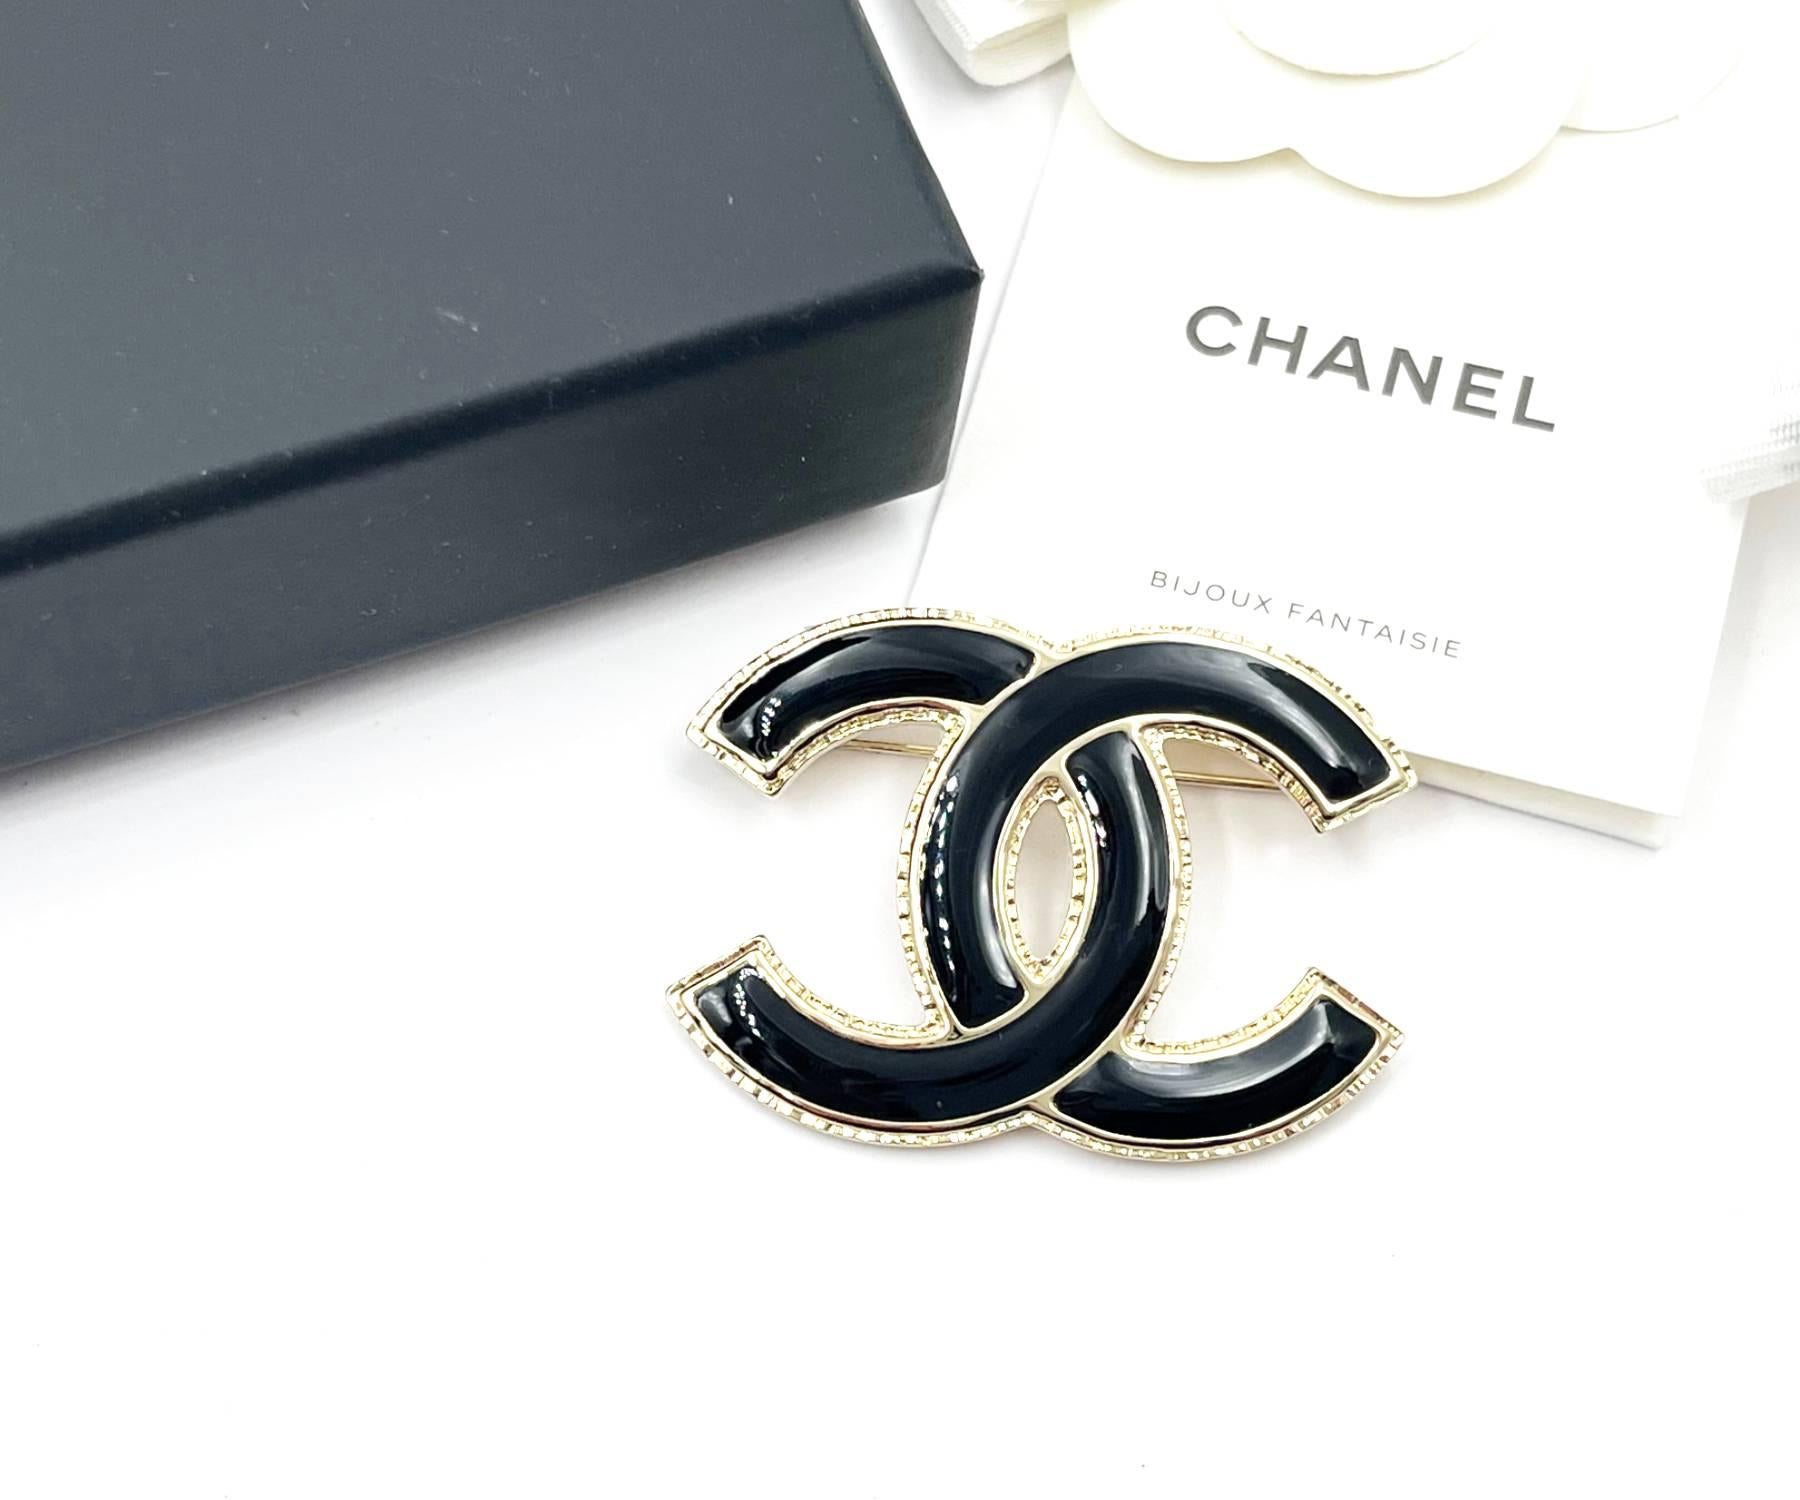 Chanel Brand New Classic Gold CC Frame Black Brooch

*Marked 22
*Made in Italy
*Comes with the original box, pouch, booklet, camellia and ribbon
*Brand New

– It is approximately 2″ x 1.5″.

10260-8202